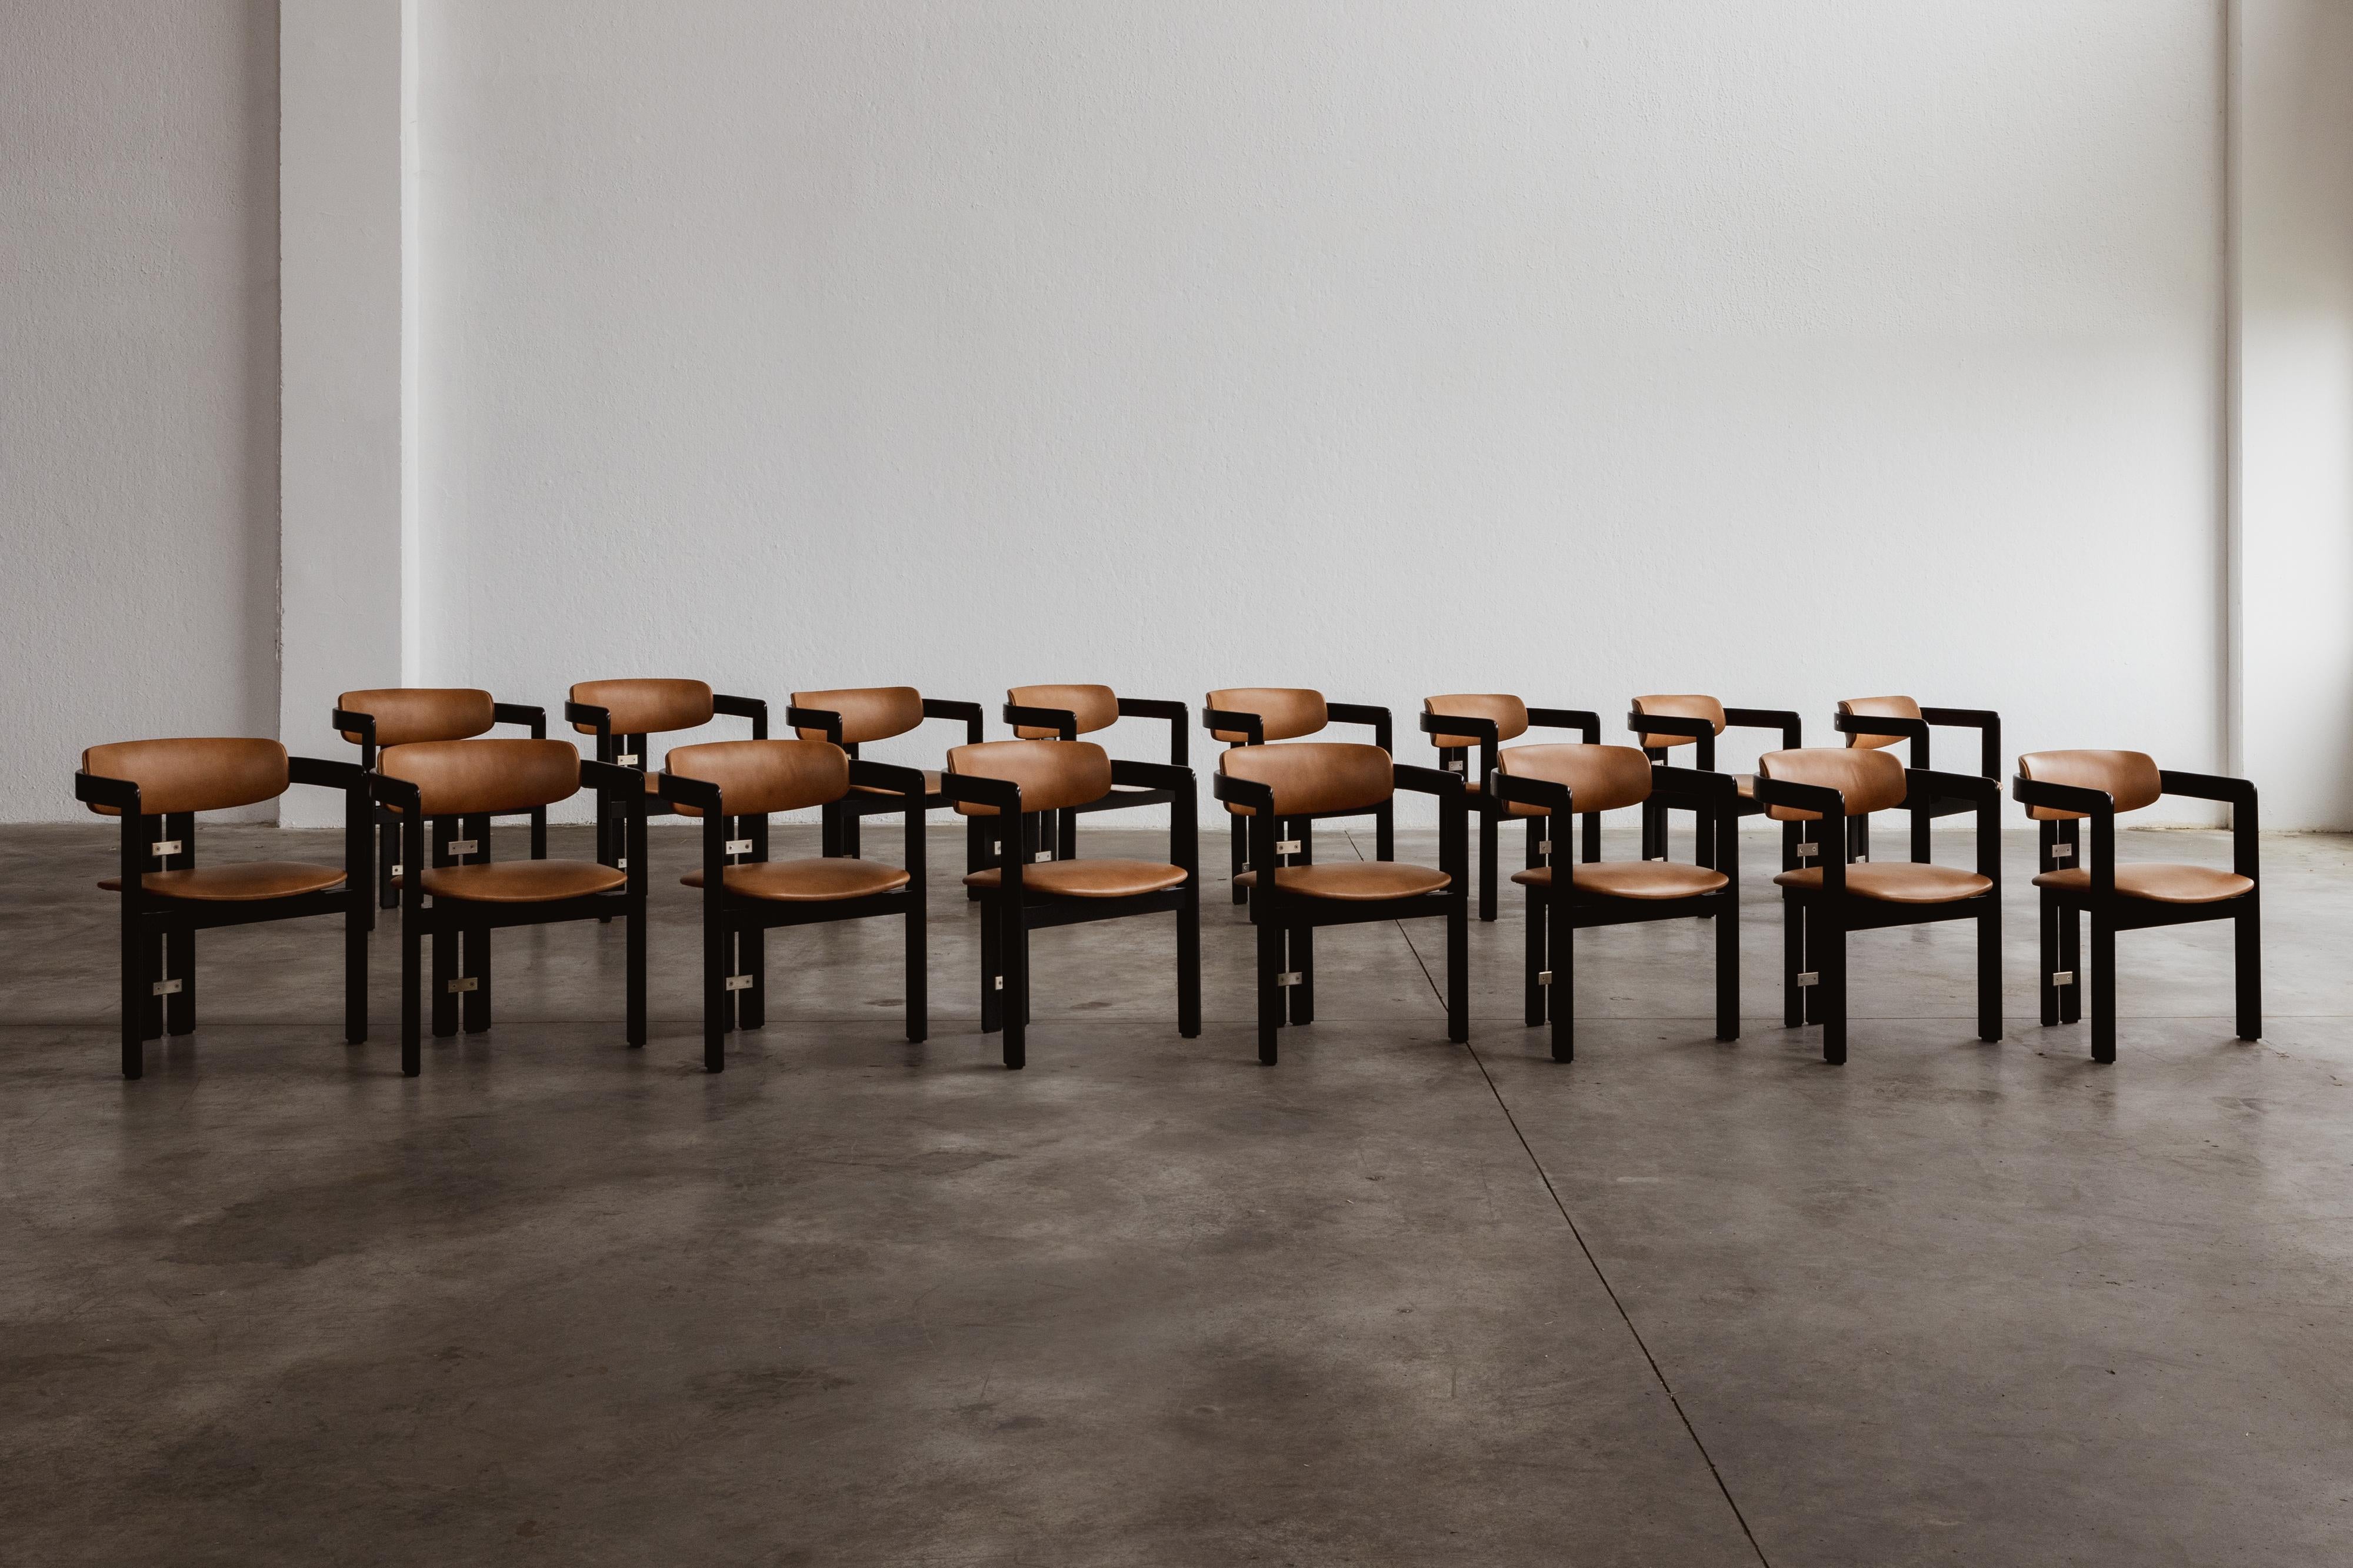 Augusto Savini “Pamplona” dining chairs for Pozzi, black framework and ranch leather, Italy, 1965, set of sixteen.

In the realm of Italian craftsmanship, the Pamplona chairs by Augusto Savini for Pozzi stand as a symbol of architectural elegance.